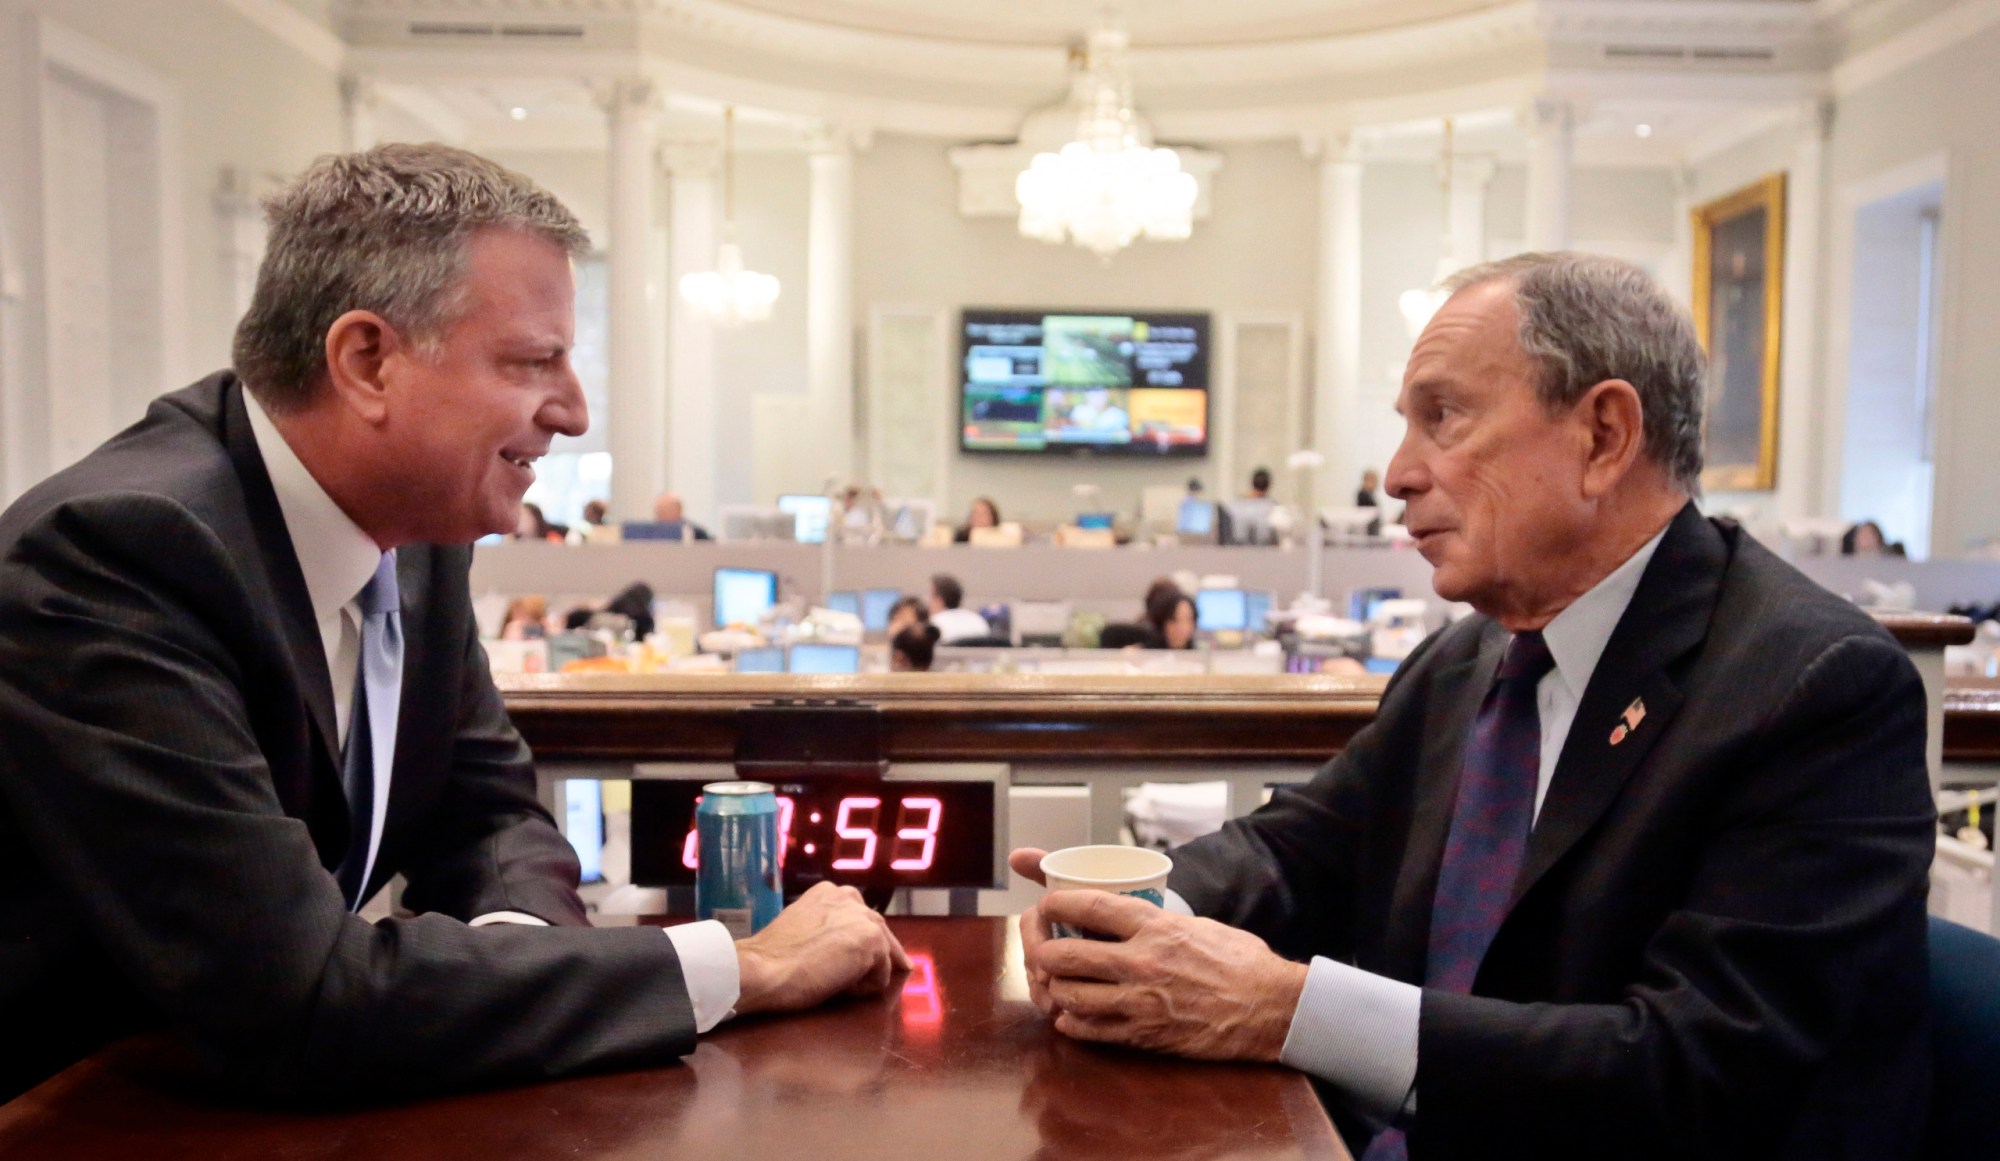 New York City Mayor-elect Bill de Blasio joins Mayor Michael Bloomberg for a meeting in the 